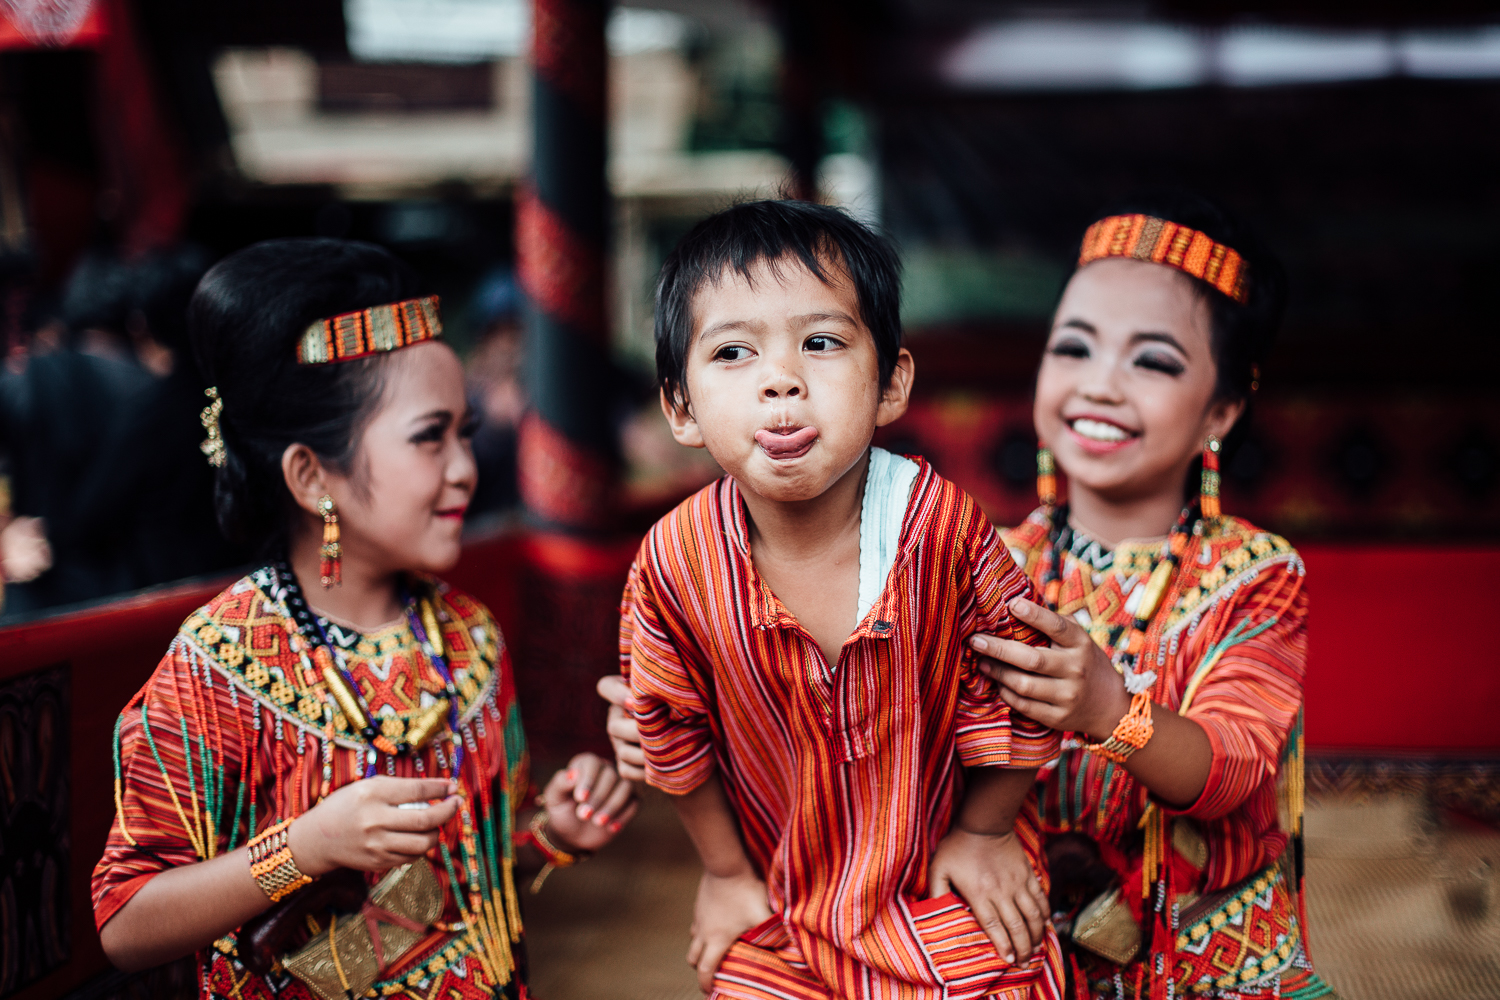 Kids wearing a traditional costume and makeup play in their lodge during the ceremony. They actively participate in the offerings but will not be allowed to escort the dead to his grave when the time of the burial comes, nor are women.